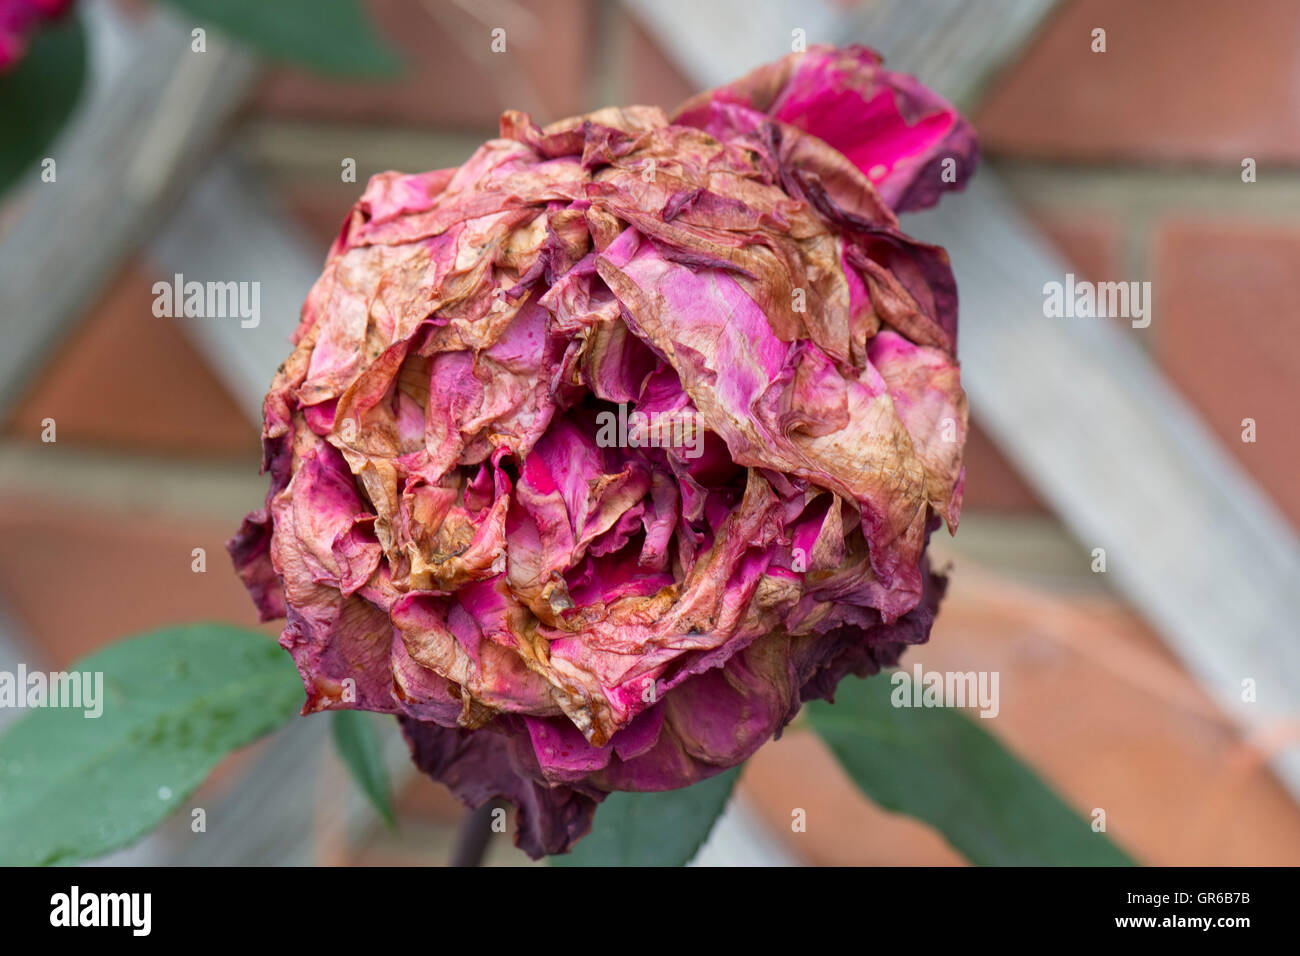 Grey mould or Botrytis blight, Botrytis cinerea, spoiling the bloom of a red rose after summer rain Stock Photo